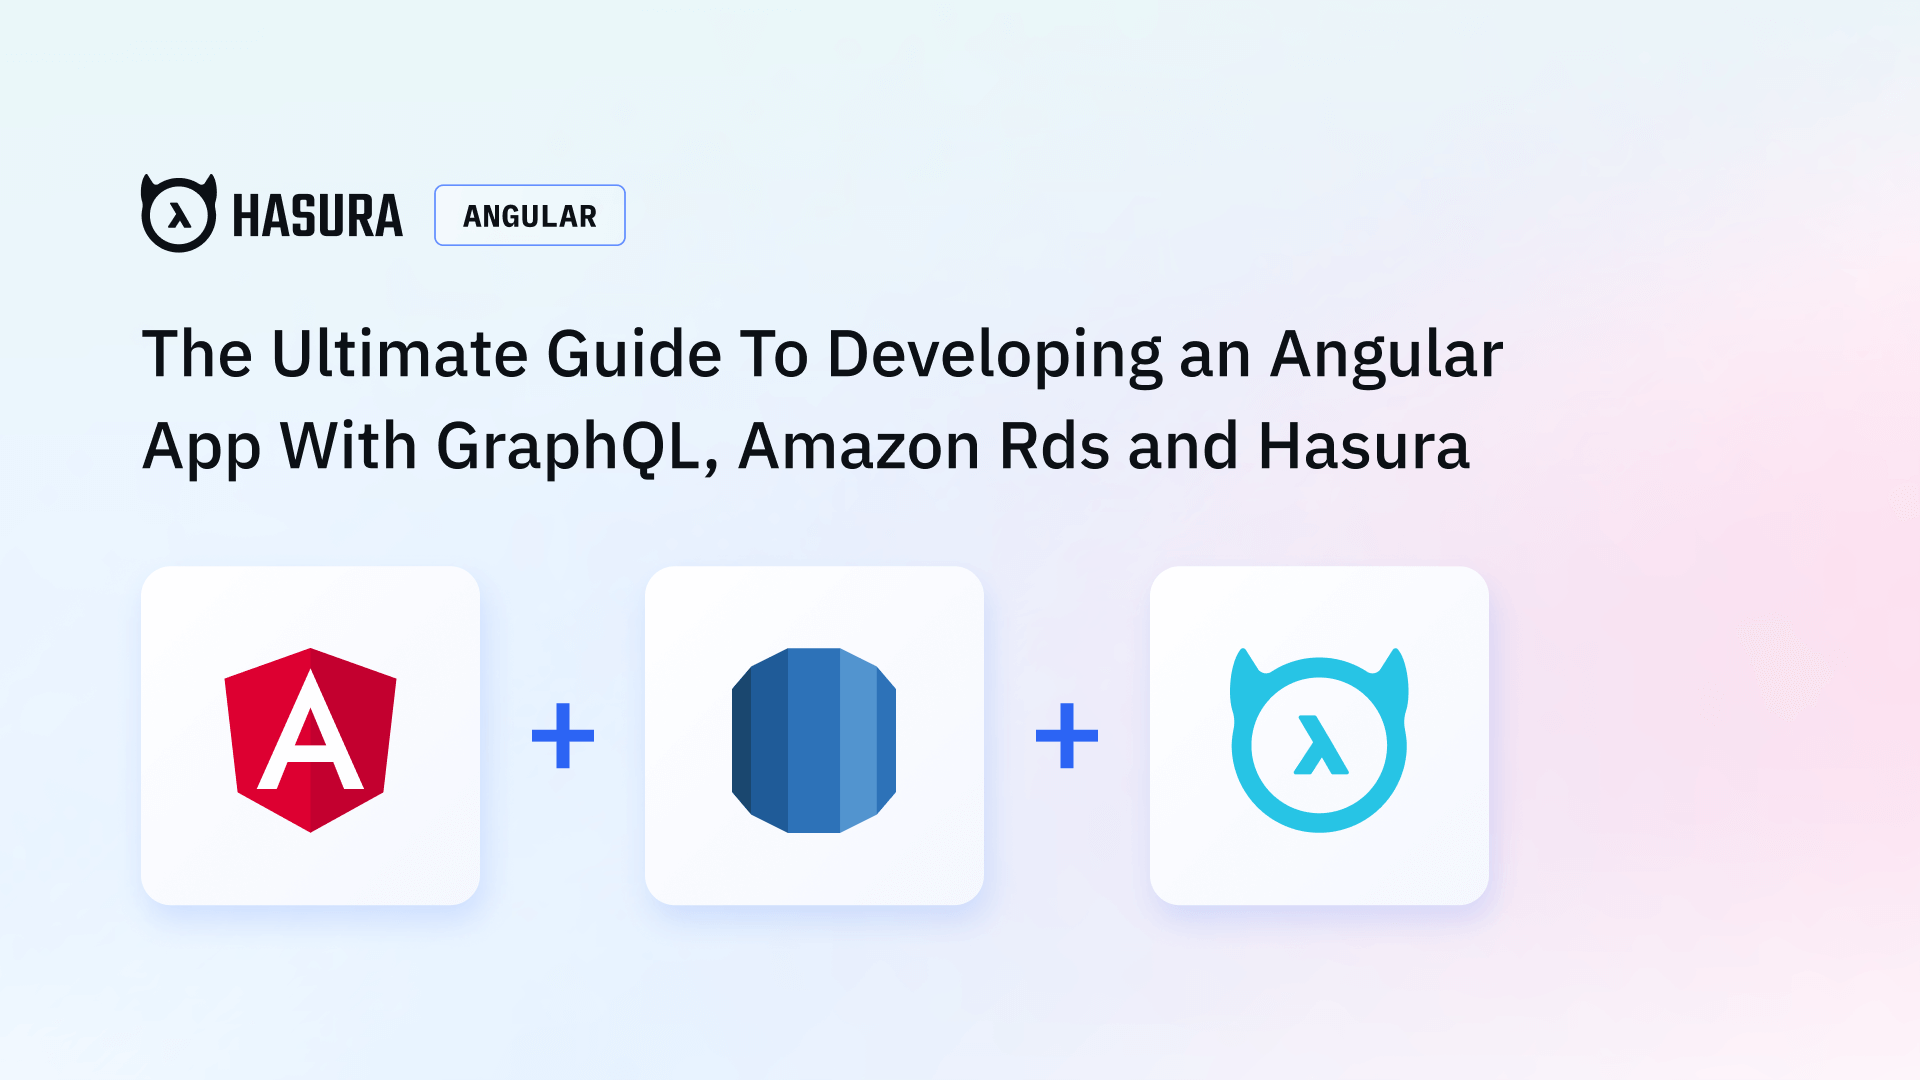 The Ultimate Guide To Developing an Angular App With GraphQL, Amazon Rds and Hasura